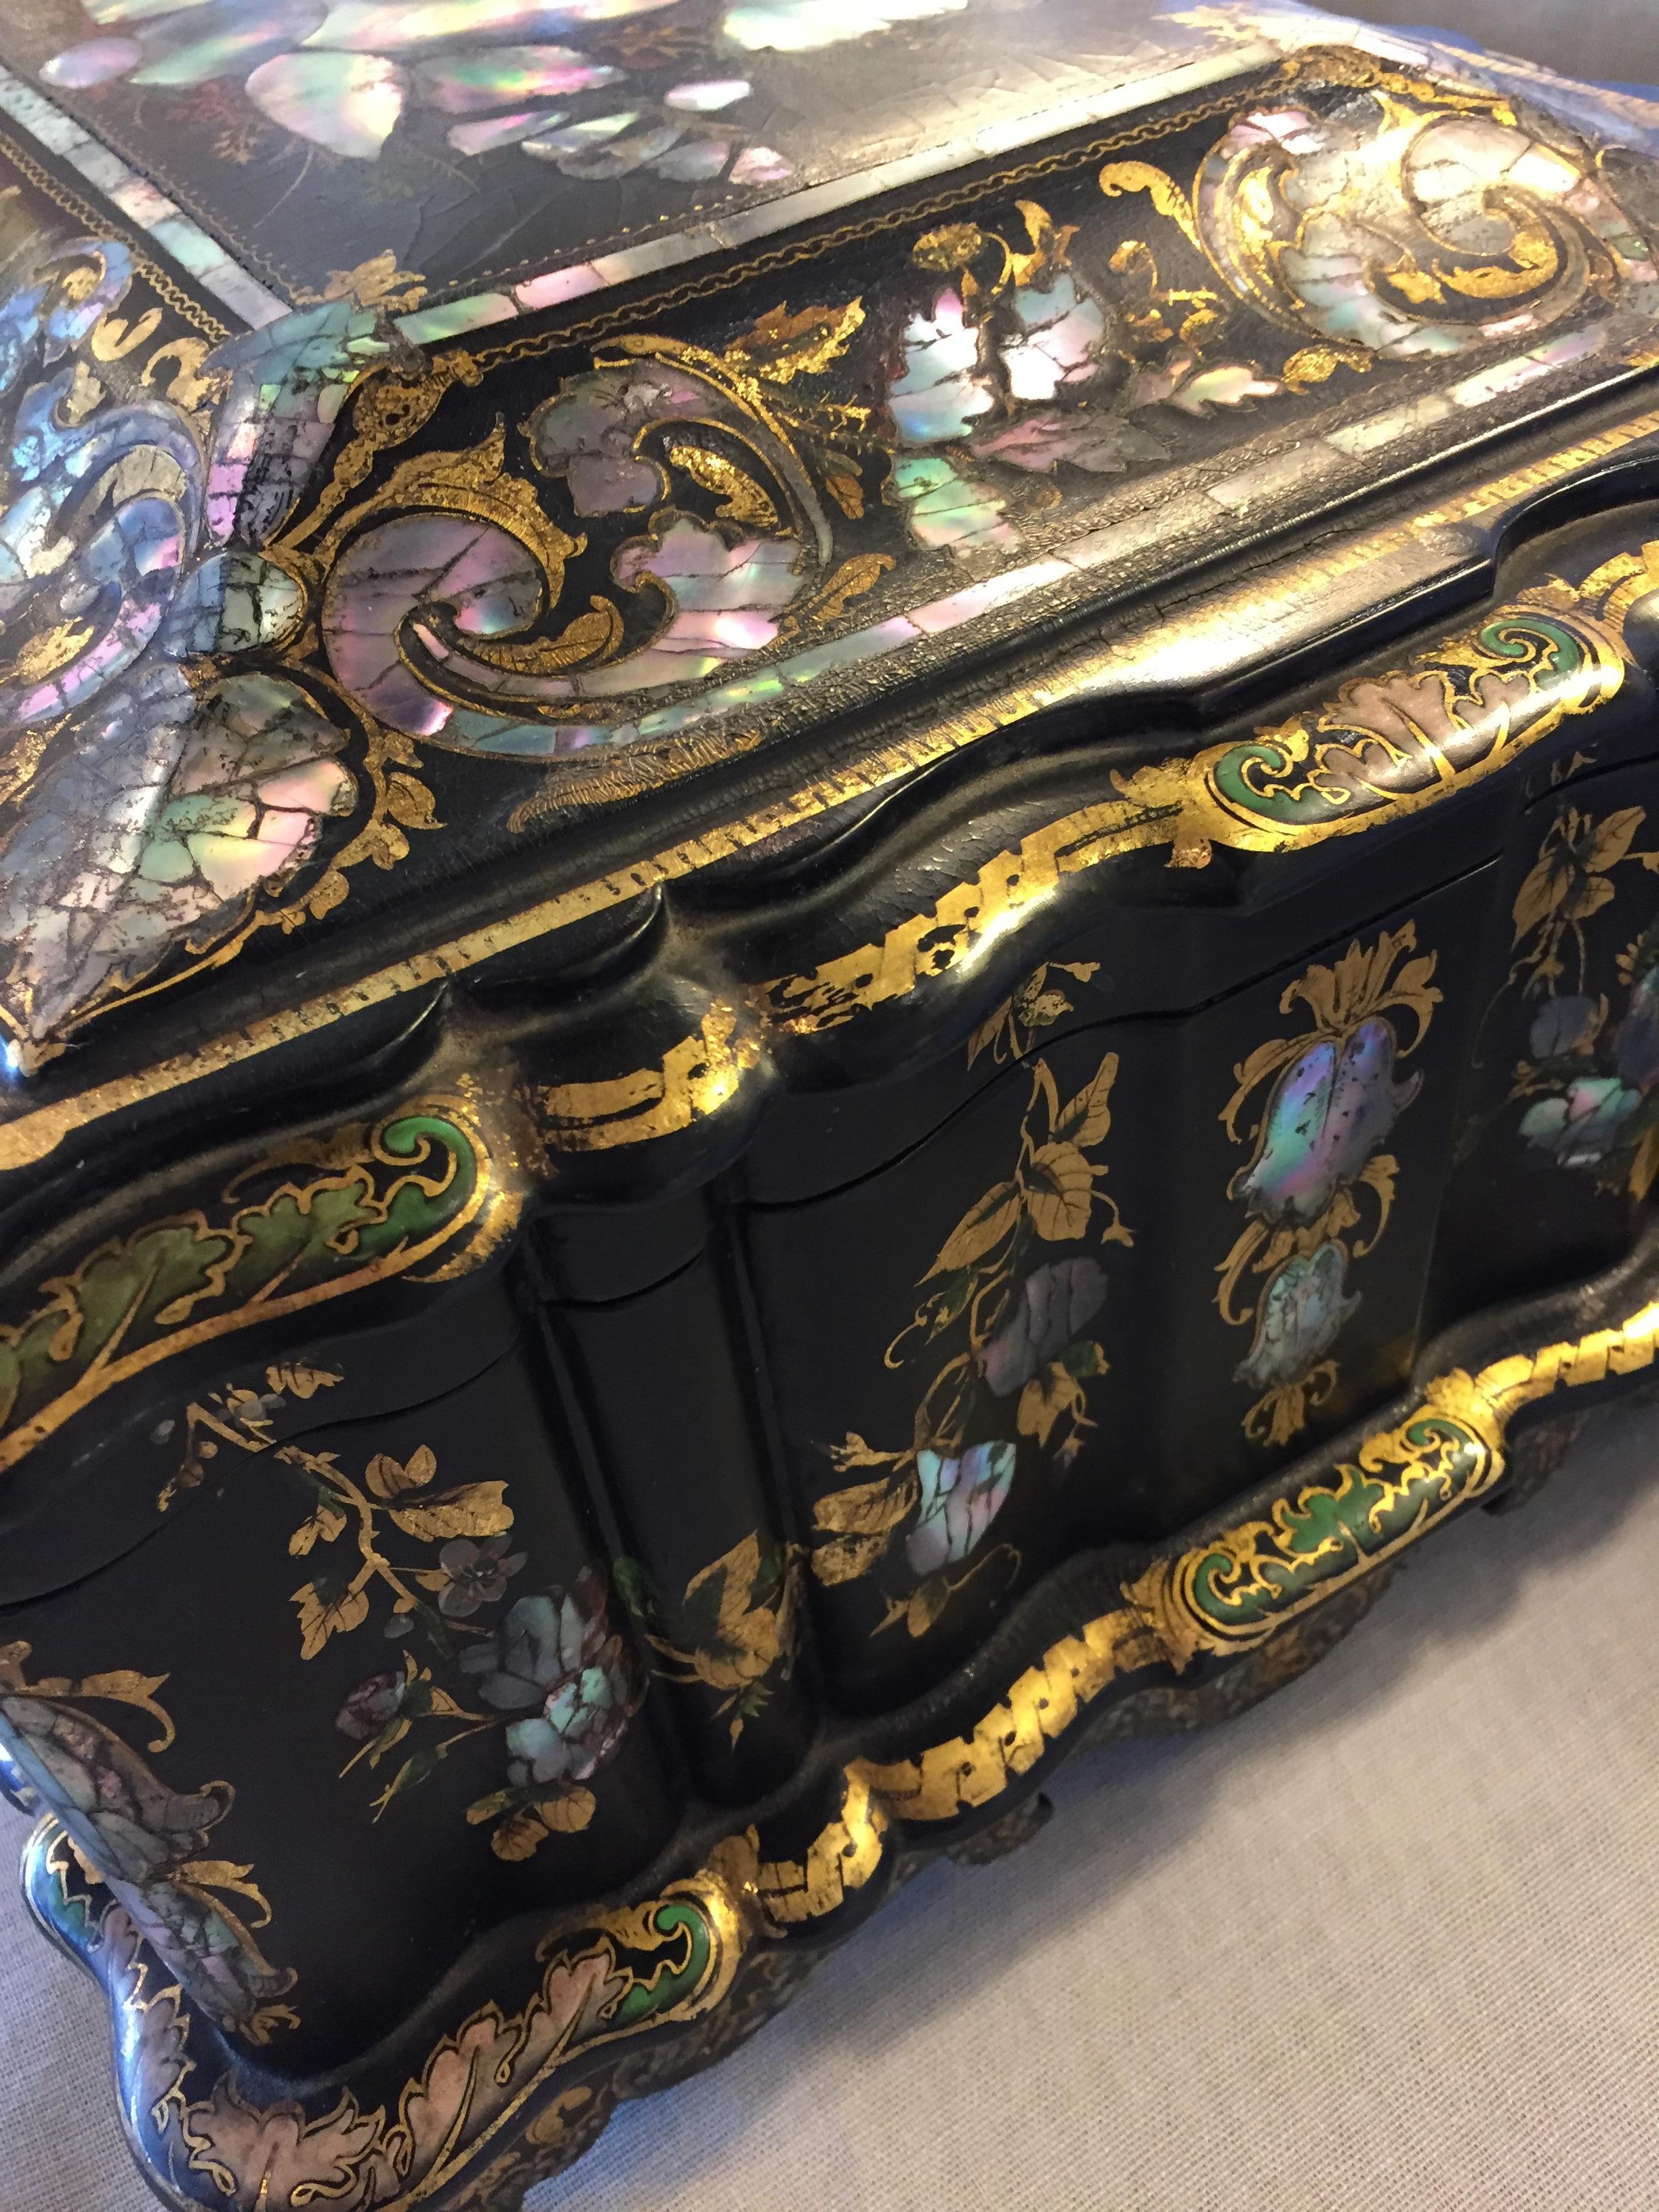 Abalone Papier Mâché Massive Size Fine Quality 19th Century Sewing Box or Jewelry Box For Sale